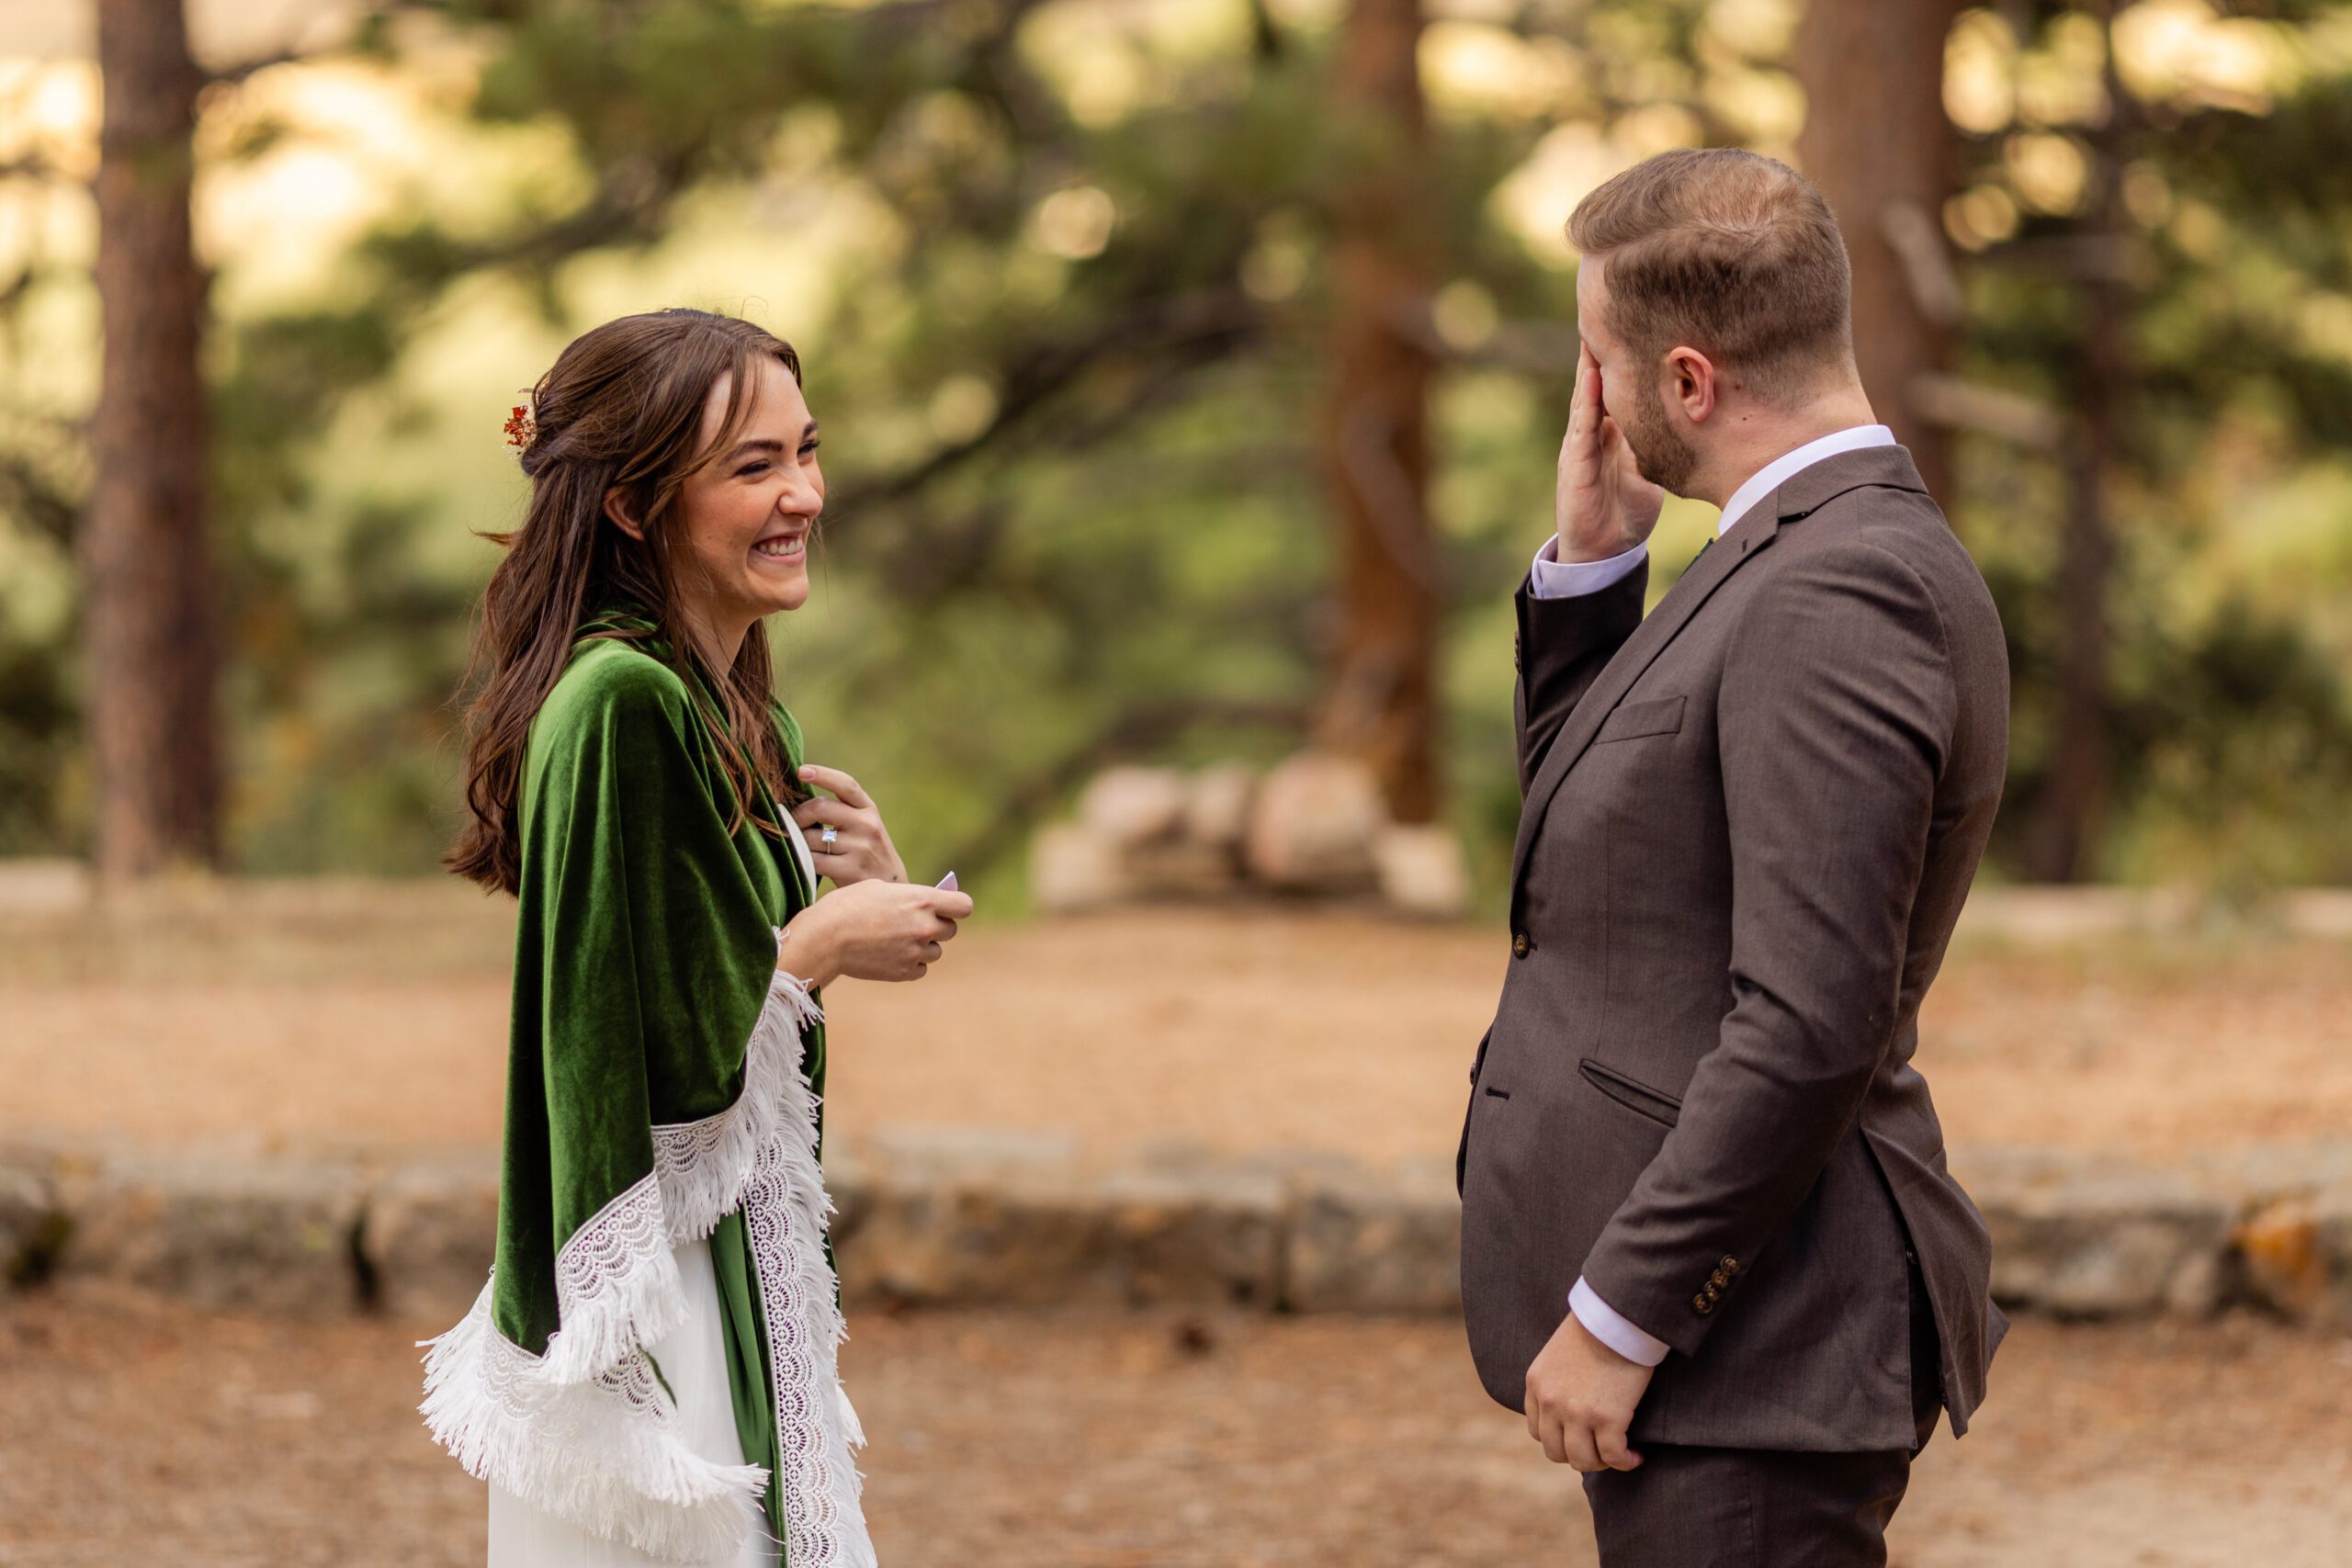 the groom wipes a tear from his eye while his bride smiles at him sweetly during their Dream Lake elopement.